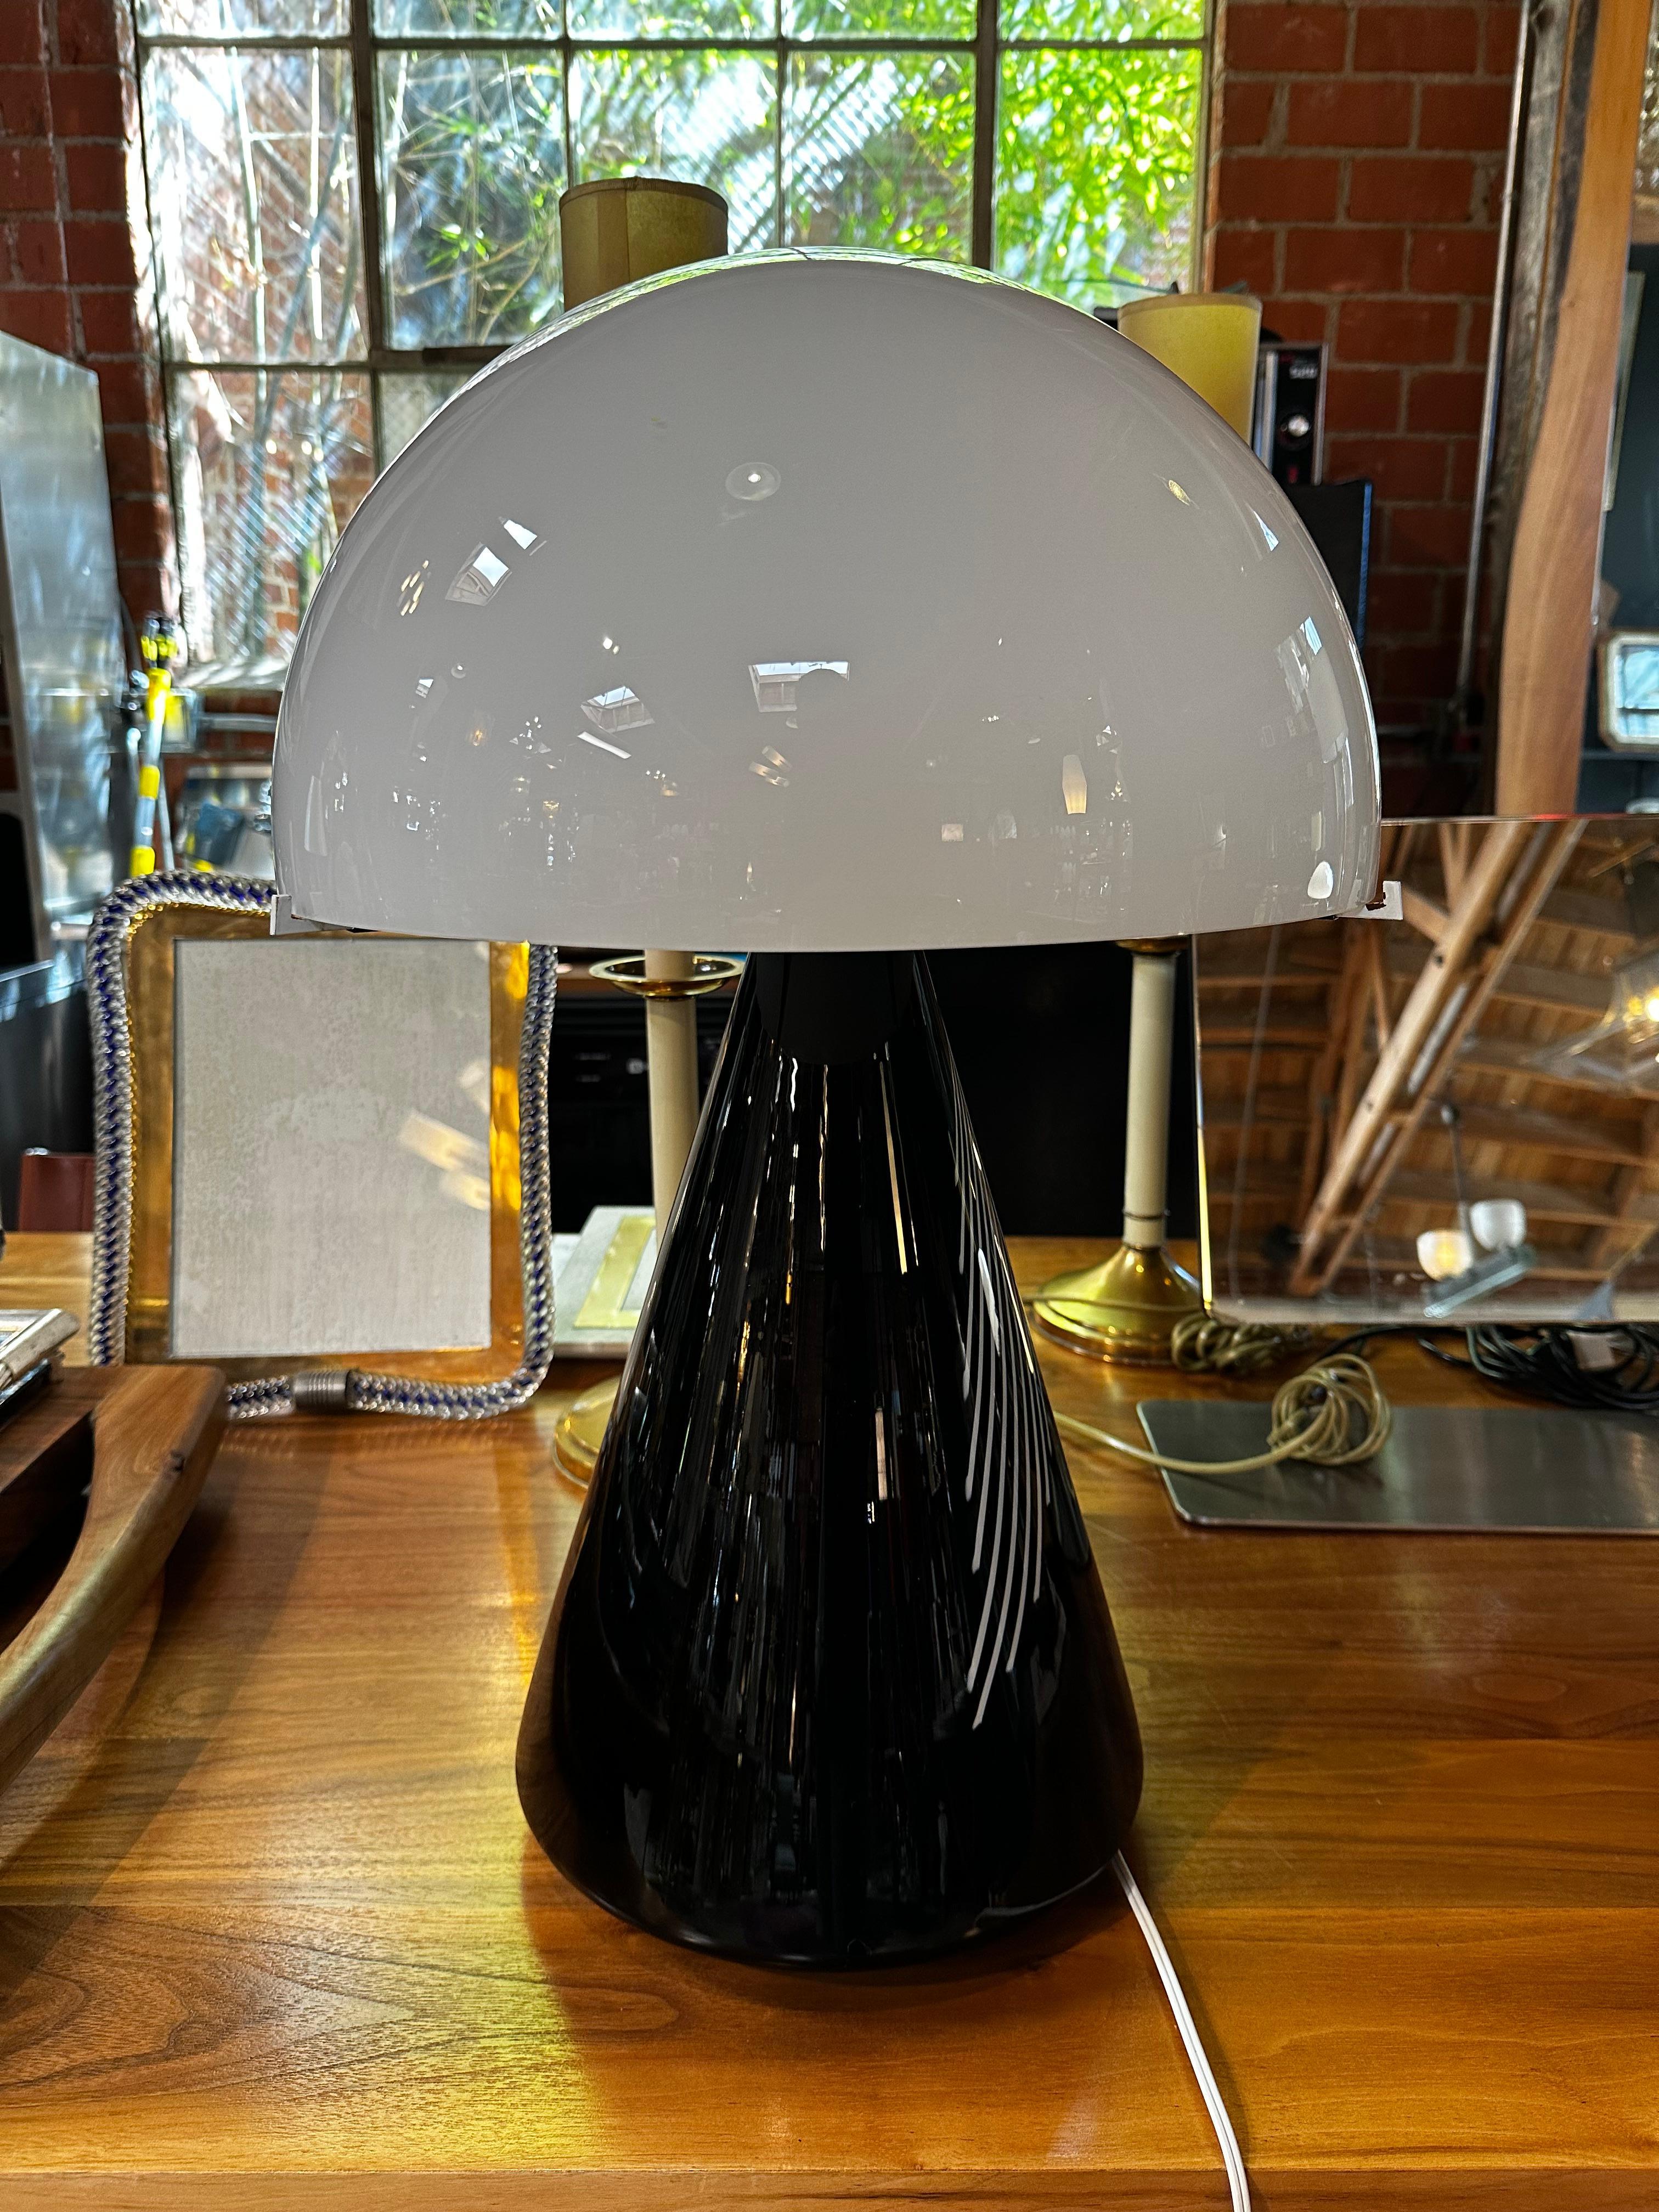 The Mushroom full blass table lamp made by Leucos in the 1980s features a stylish black glass base and a white glass shade. The overall design of the lamp resembles a mushroom, with the shade curving outward like a cap. The glass construction allows